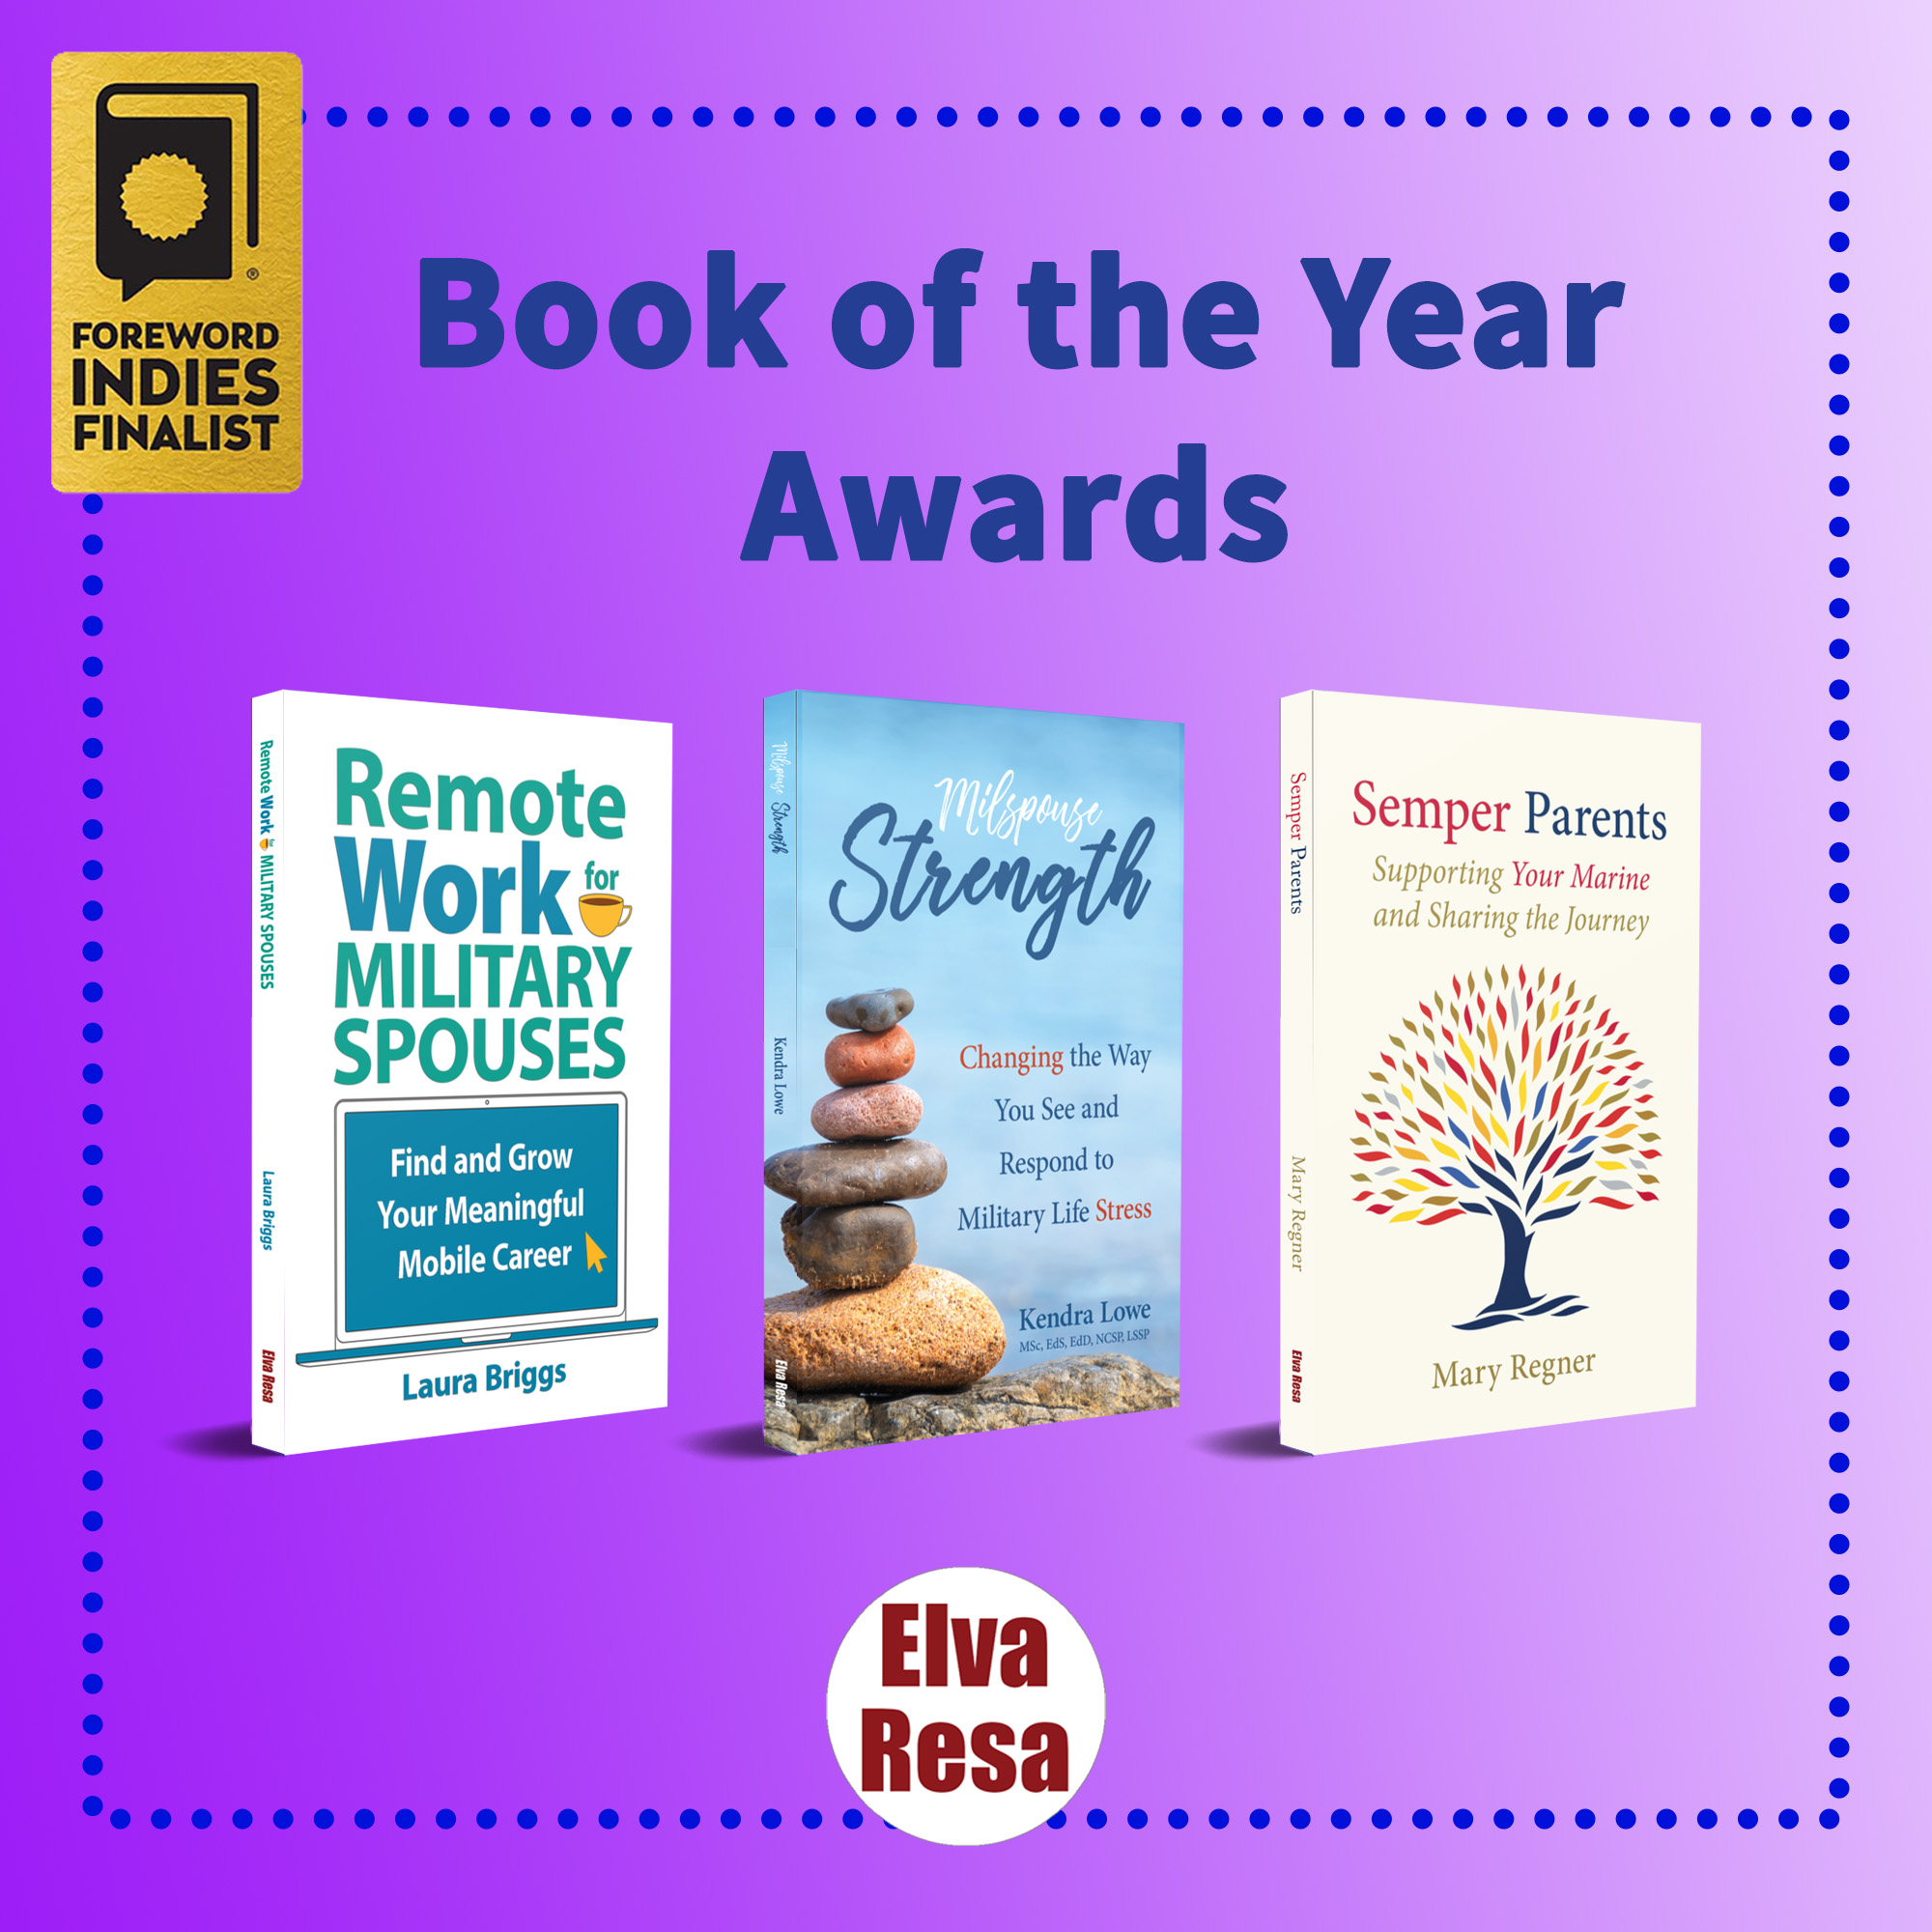 Elva Resa's Remote Work for Military Spouses, Milspouse Strength, and Semper Parents all named finalists for Foreword INDIES Book of the Year Award